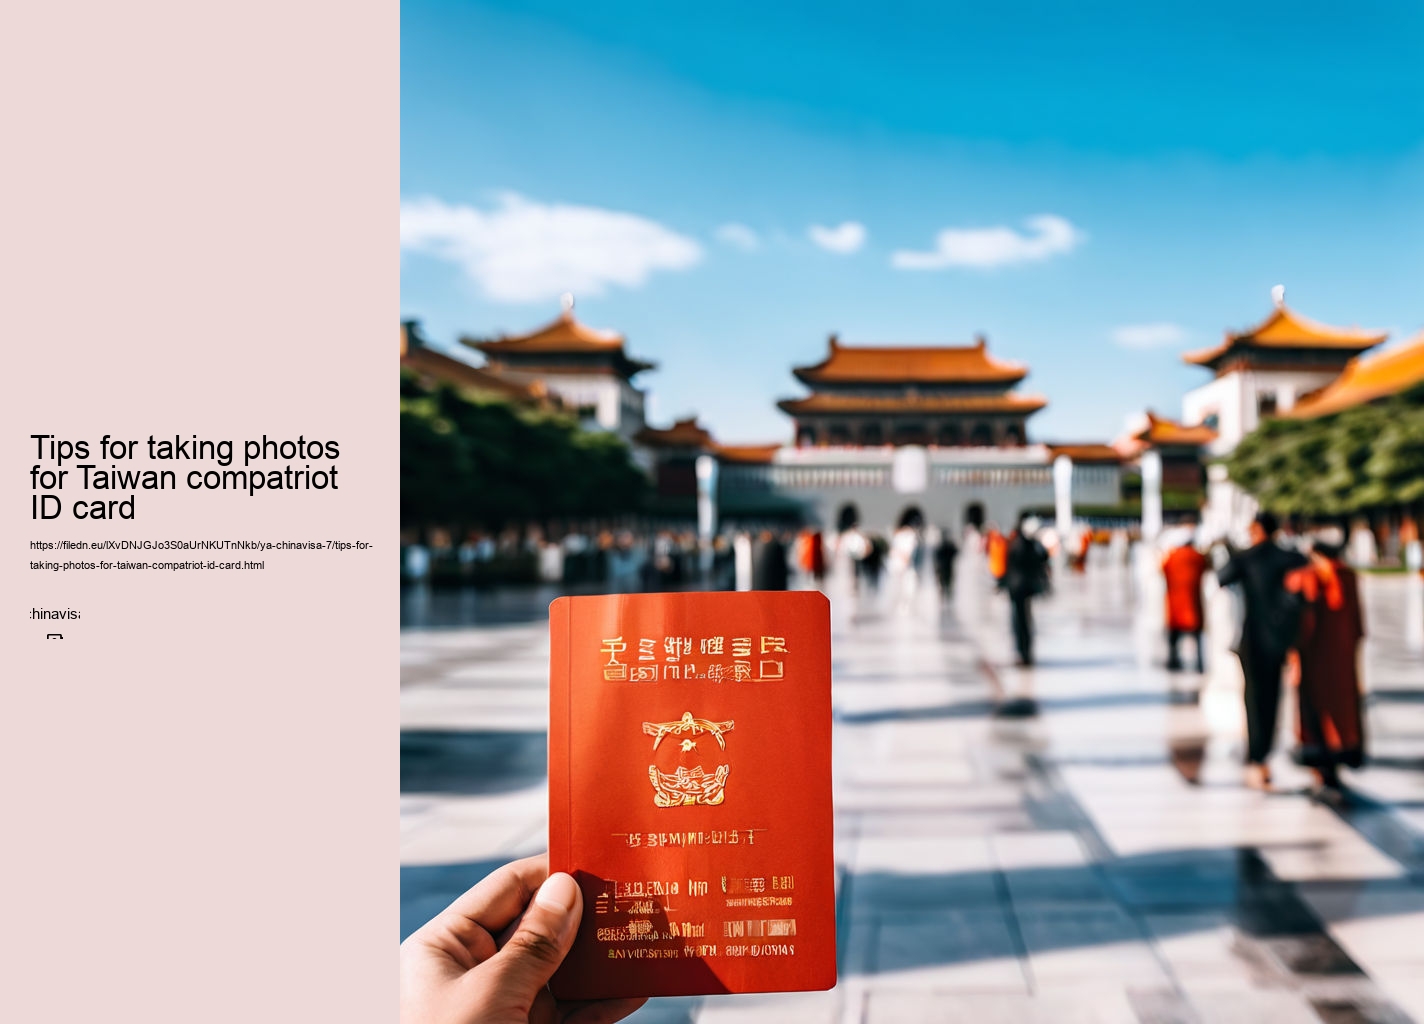 Tips for taking photos for Taiwan compatriot ID card